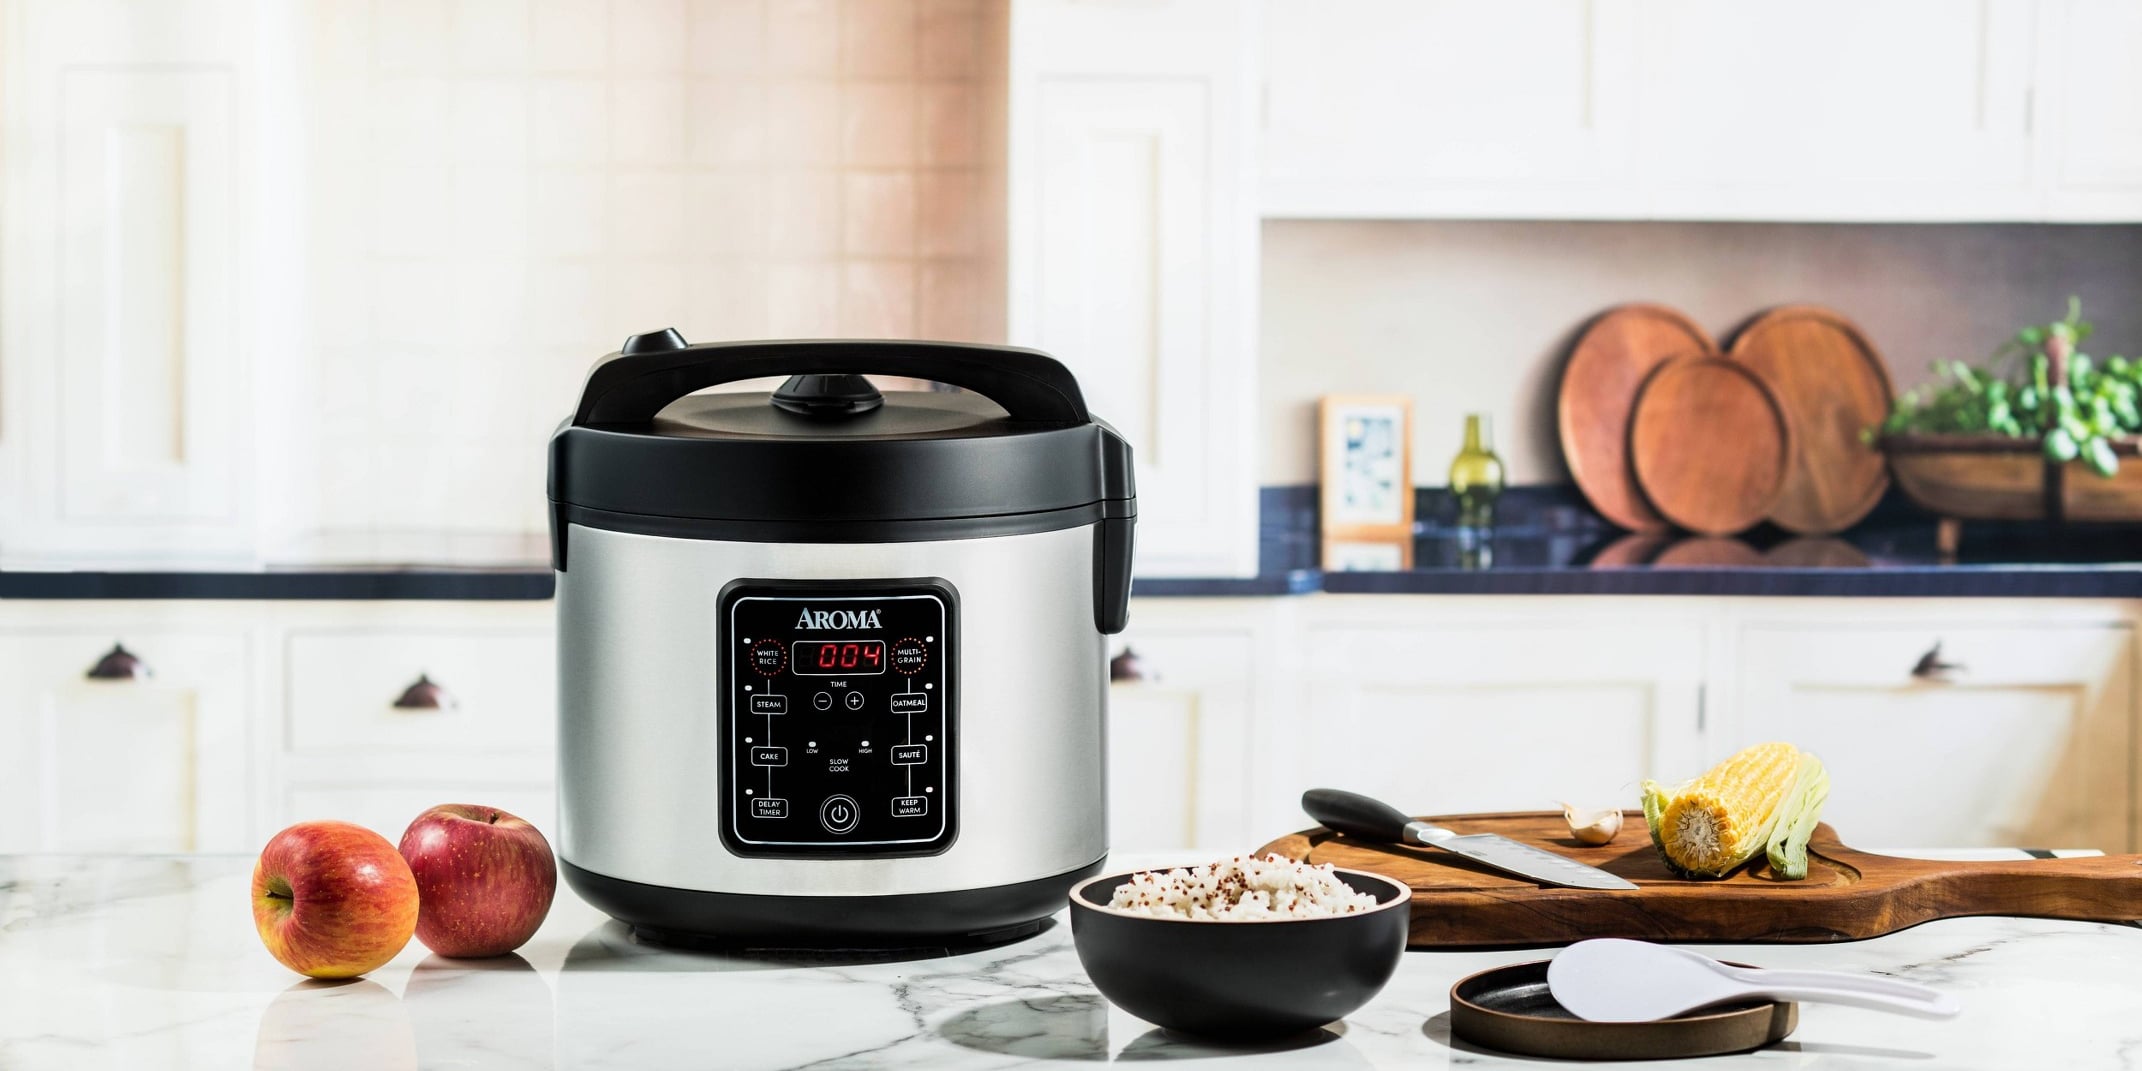 Low Carb Rice Cooker Small, 3 Cup Uncook Rice Cooker with Steamer, Delay  Timer, Auto Keep Warm, Rice/Sushi/Cake/Vegetable, Black